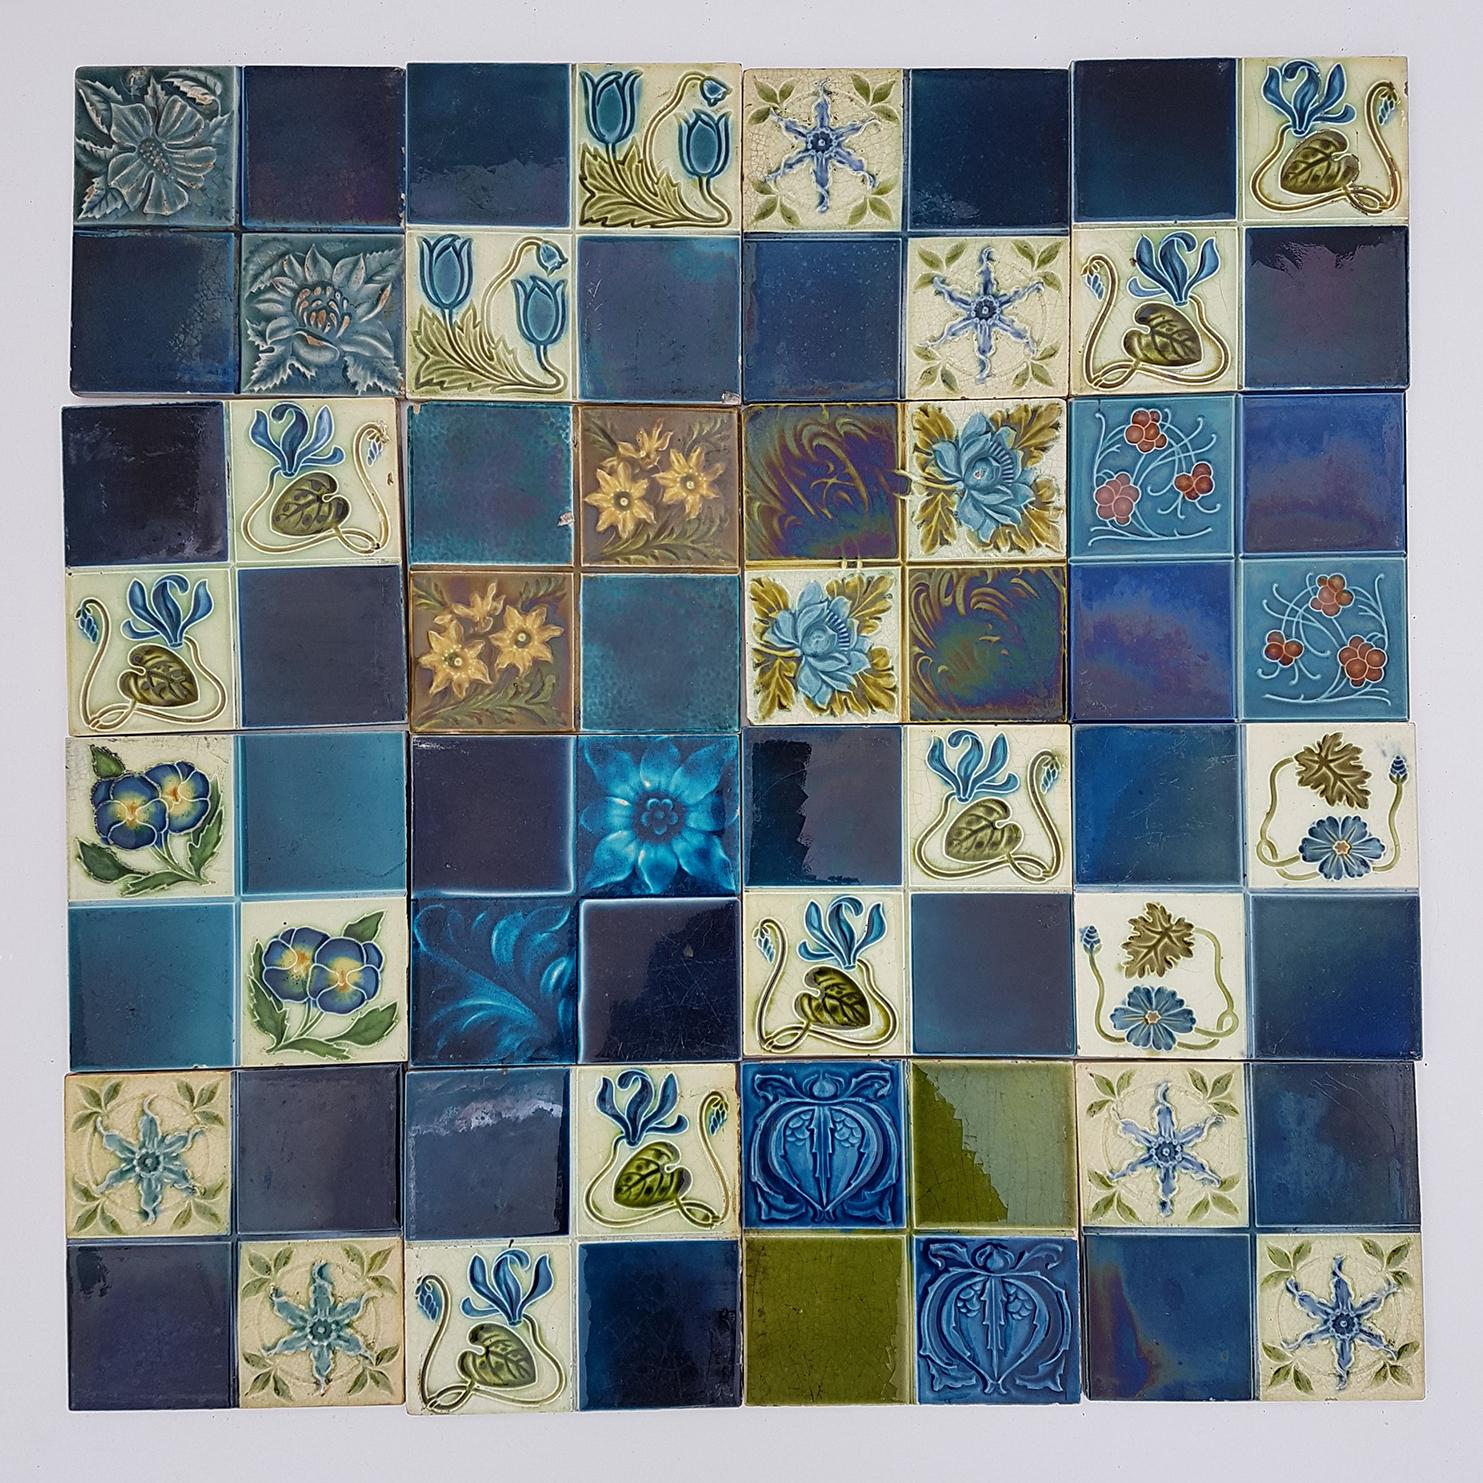 This is an amazing set of Art Jugendstil handmade tiles. A beautiful relief and color. With a different stylized designs. These tiles would be charming displayed on easels, framed or incorporated into a custom tile design.

Size each tile: 5.9